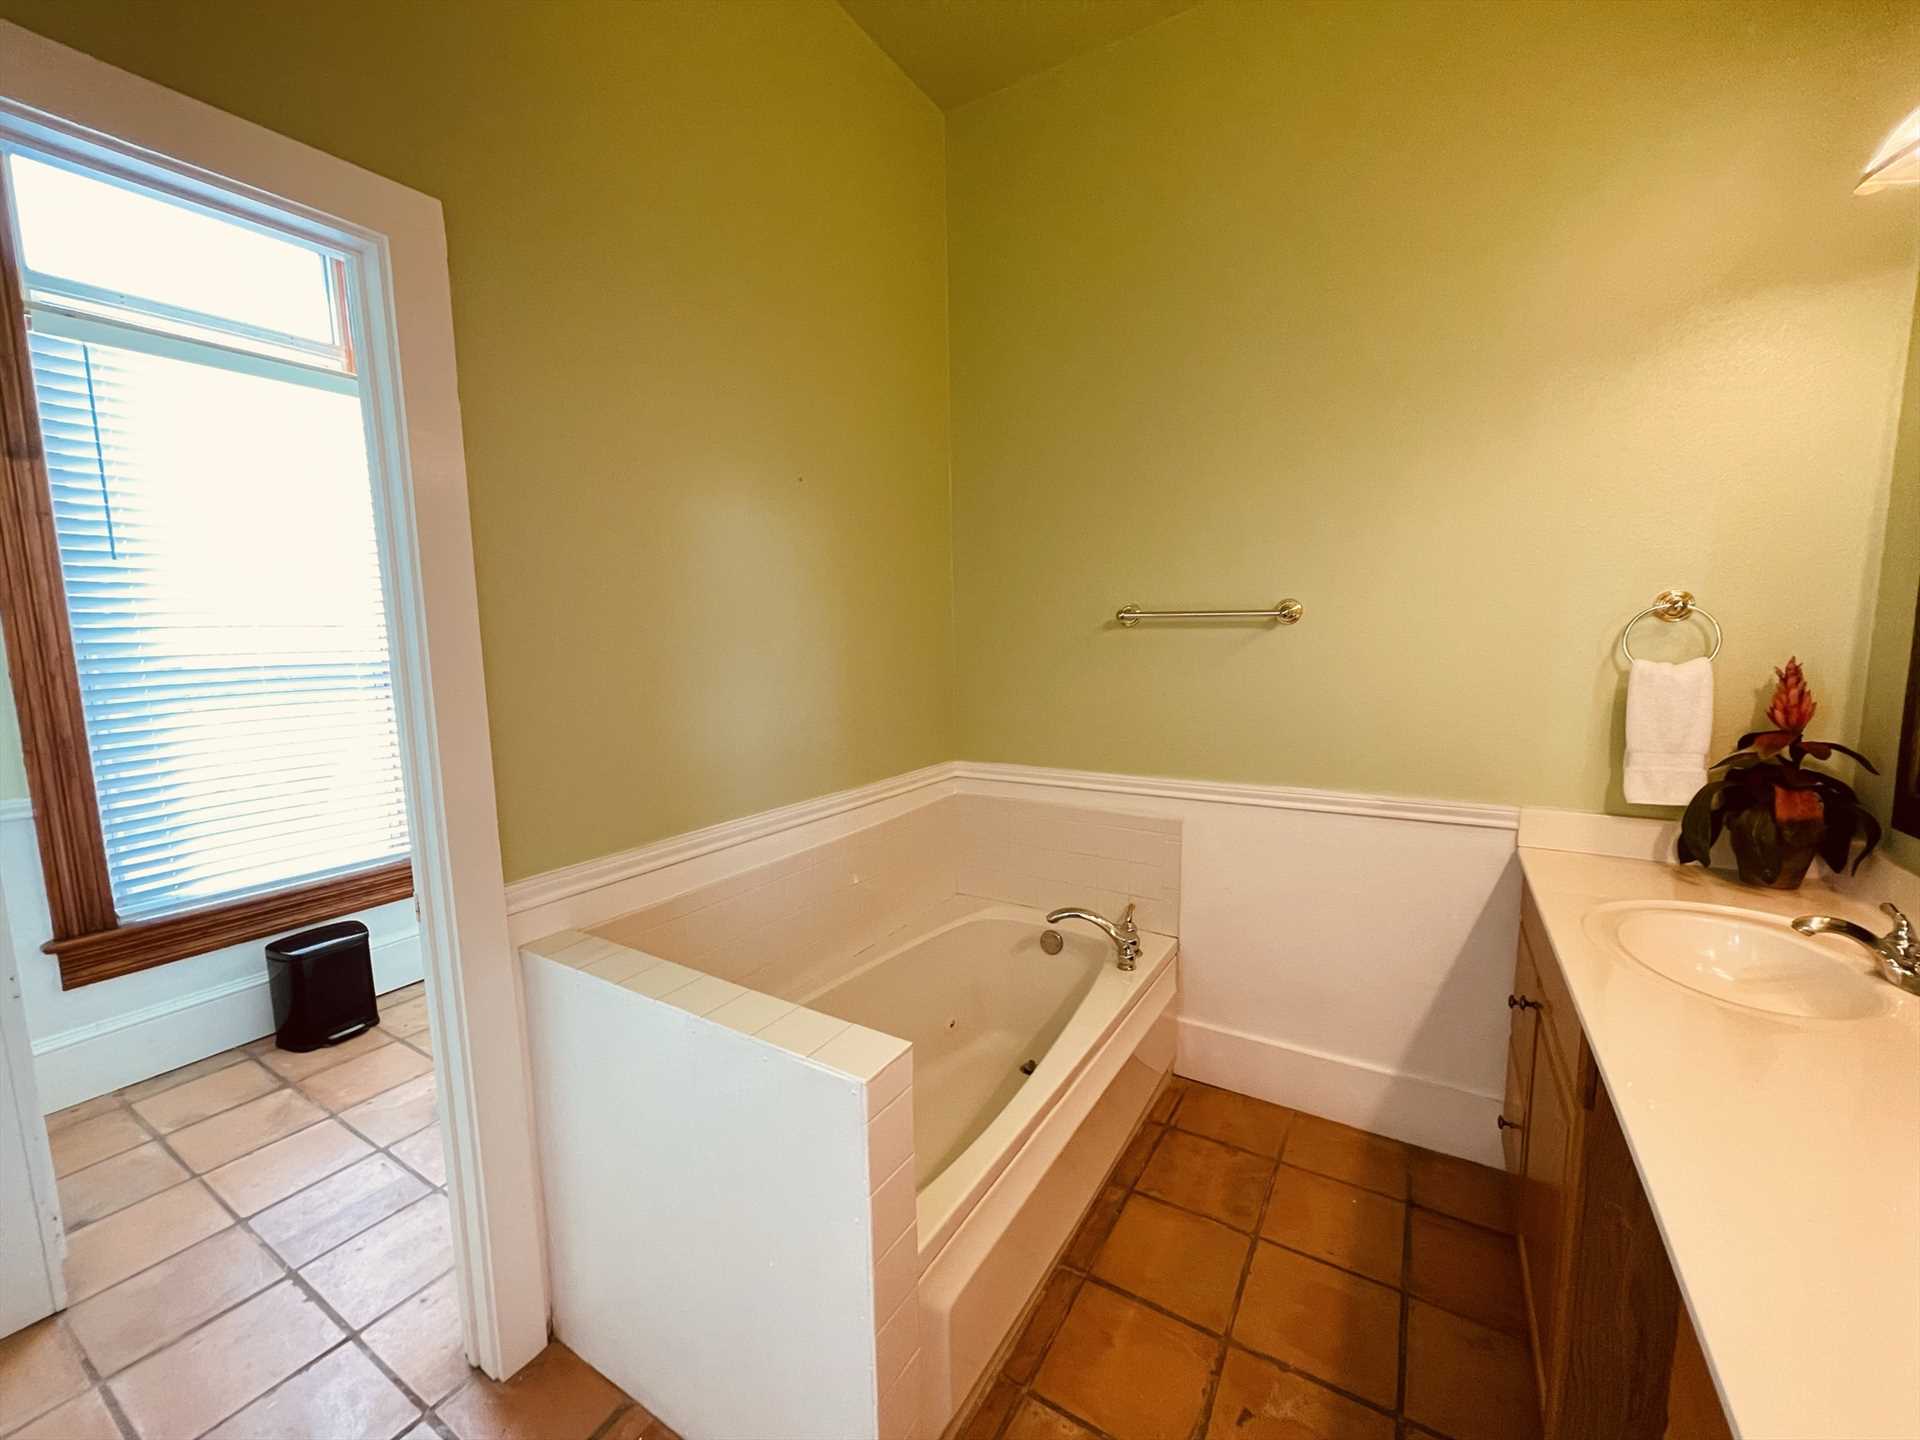                                                 While all the three bathrooms here include shower stalls, there's also a relaxing tub in the master bath!